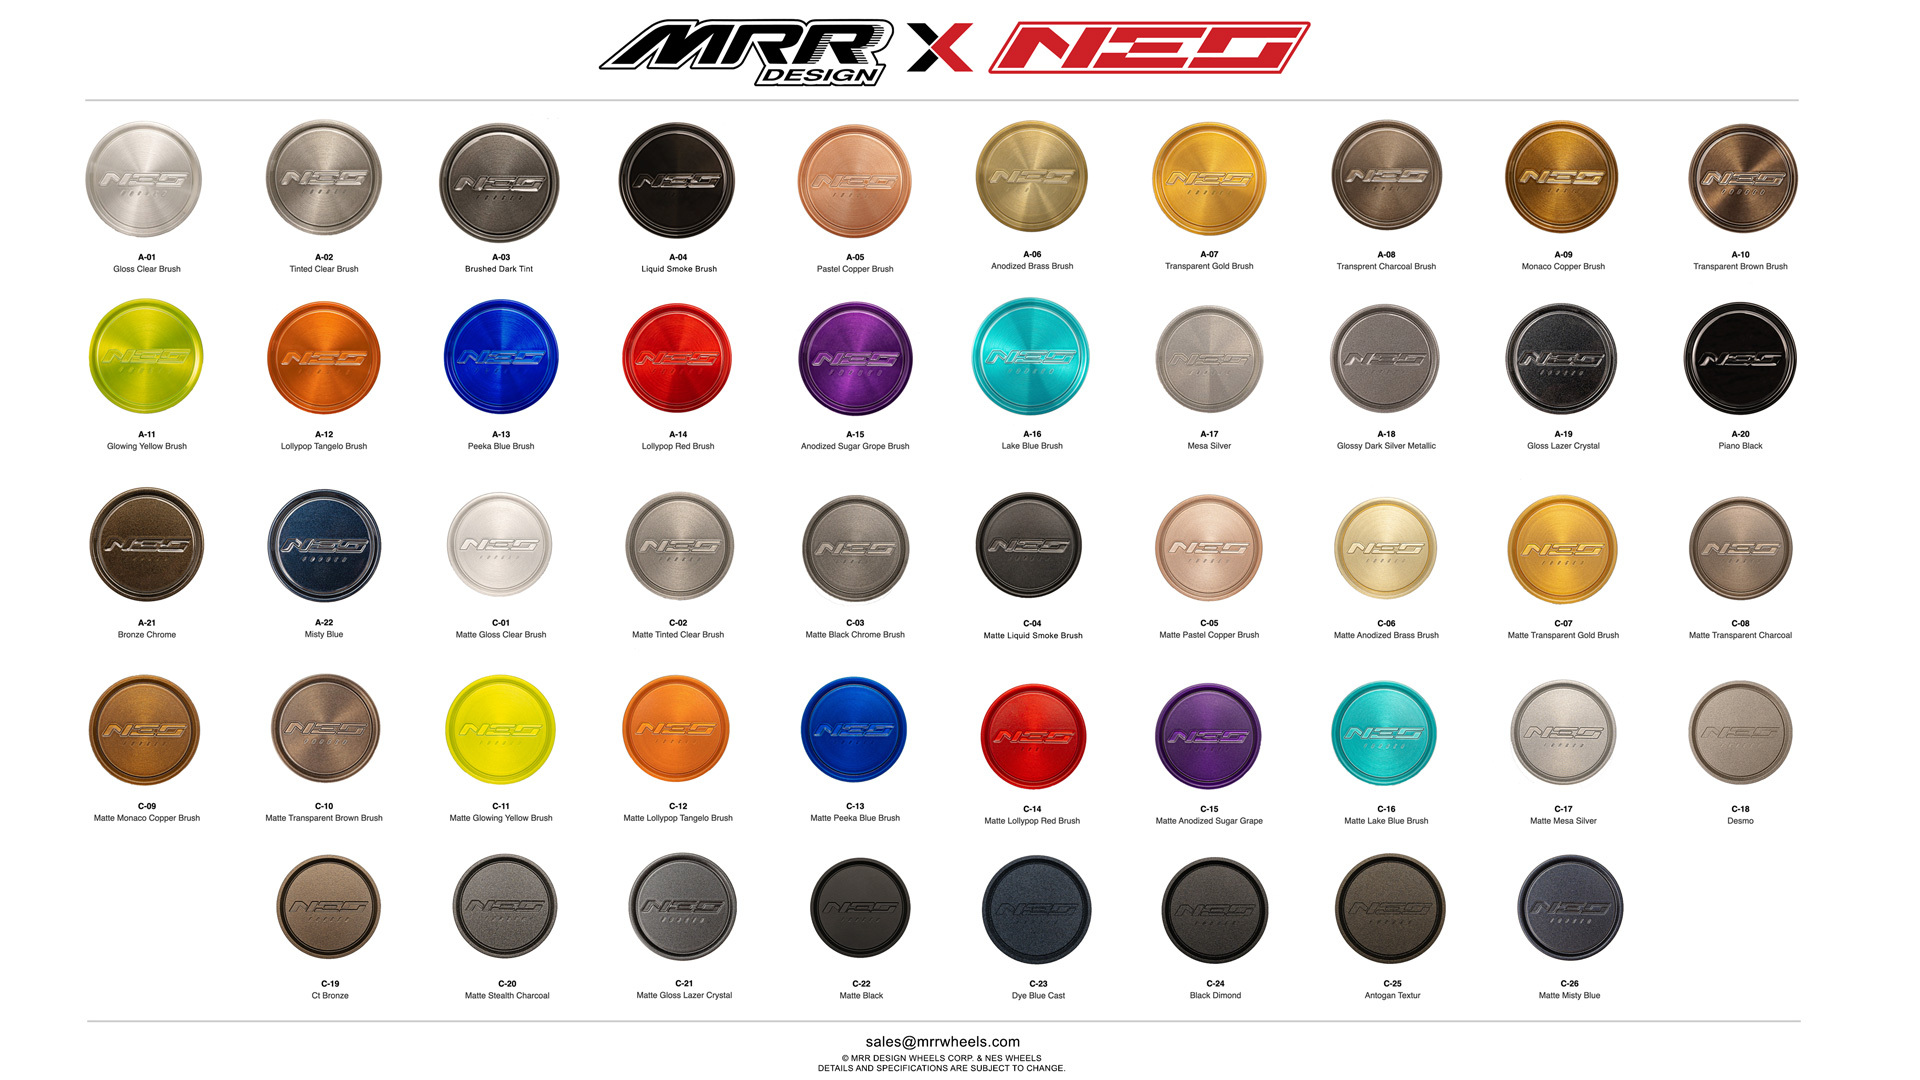 S650 Mustang New** NES Forged Wheels by MRR Design 1pc and 2pc MRRXNES-COLORMENU